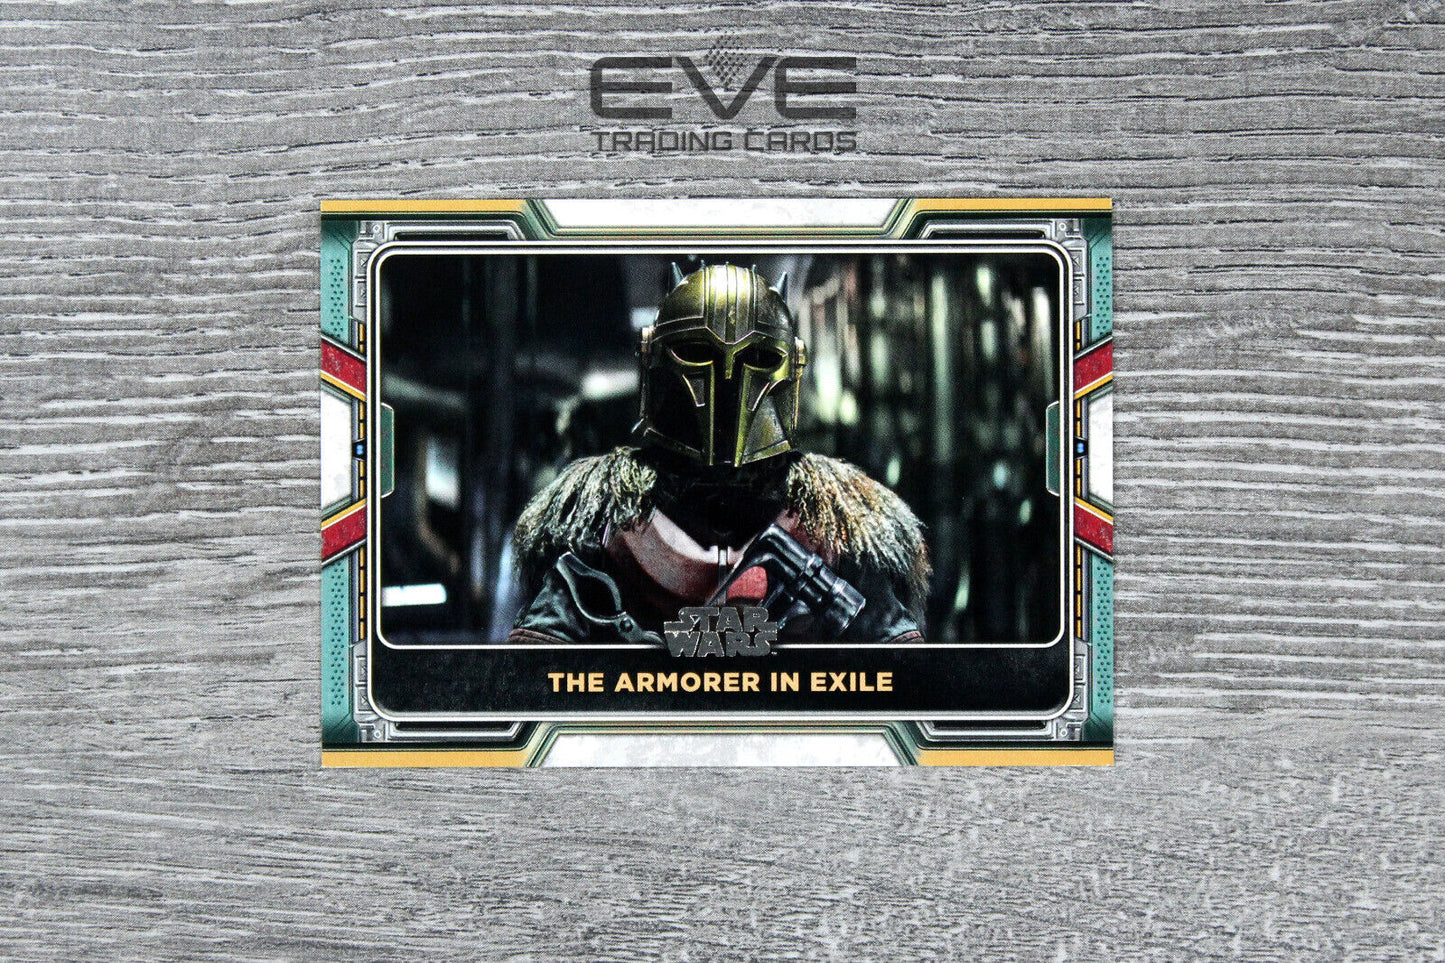 2022 Topps Star Wars Book of Boba Fett Card #64 The Armorer in Exile